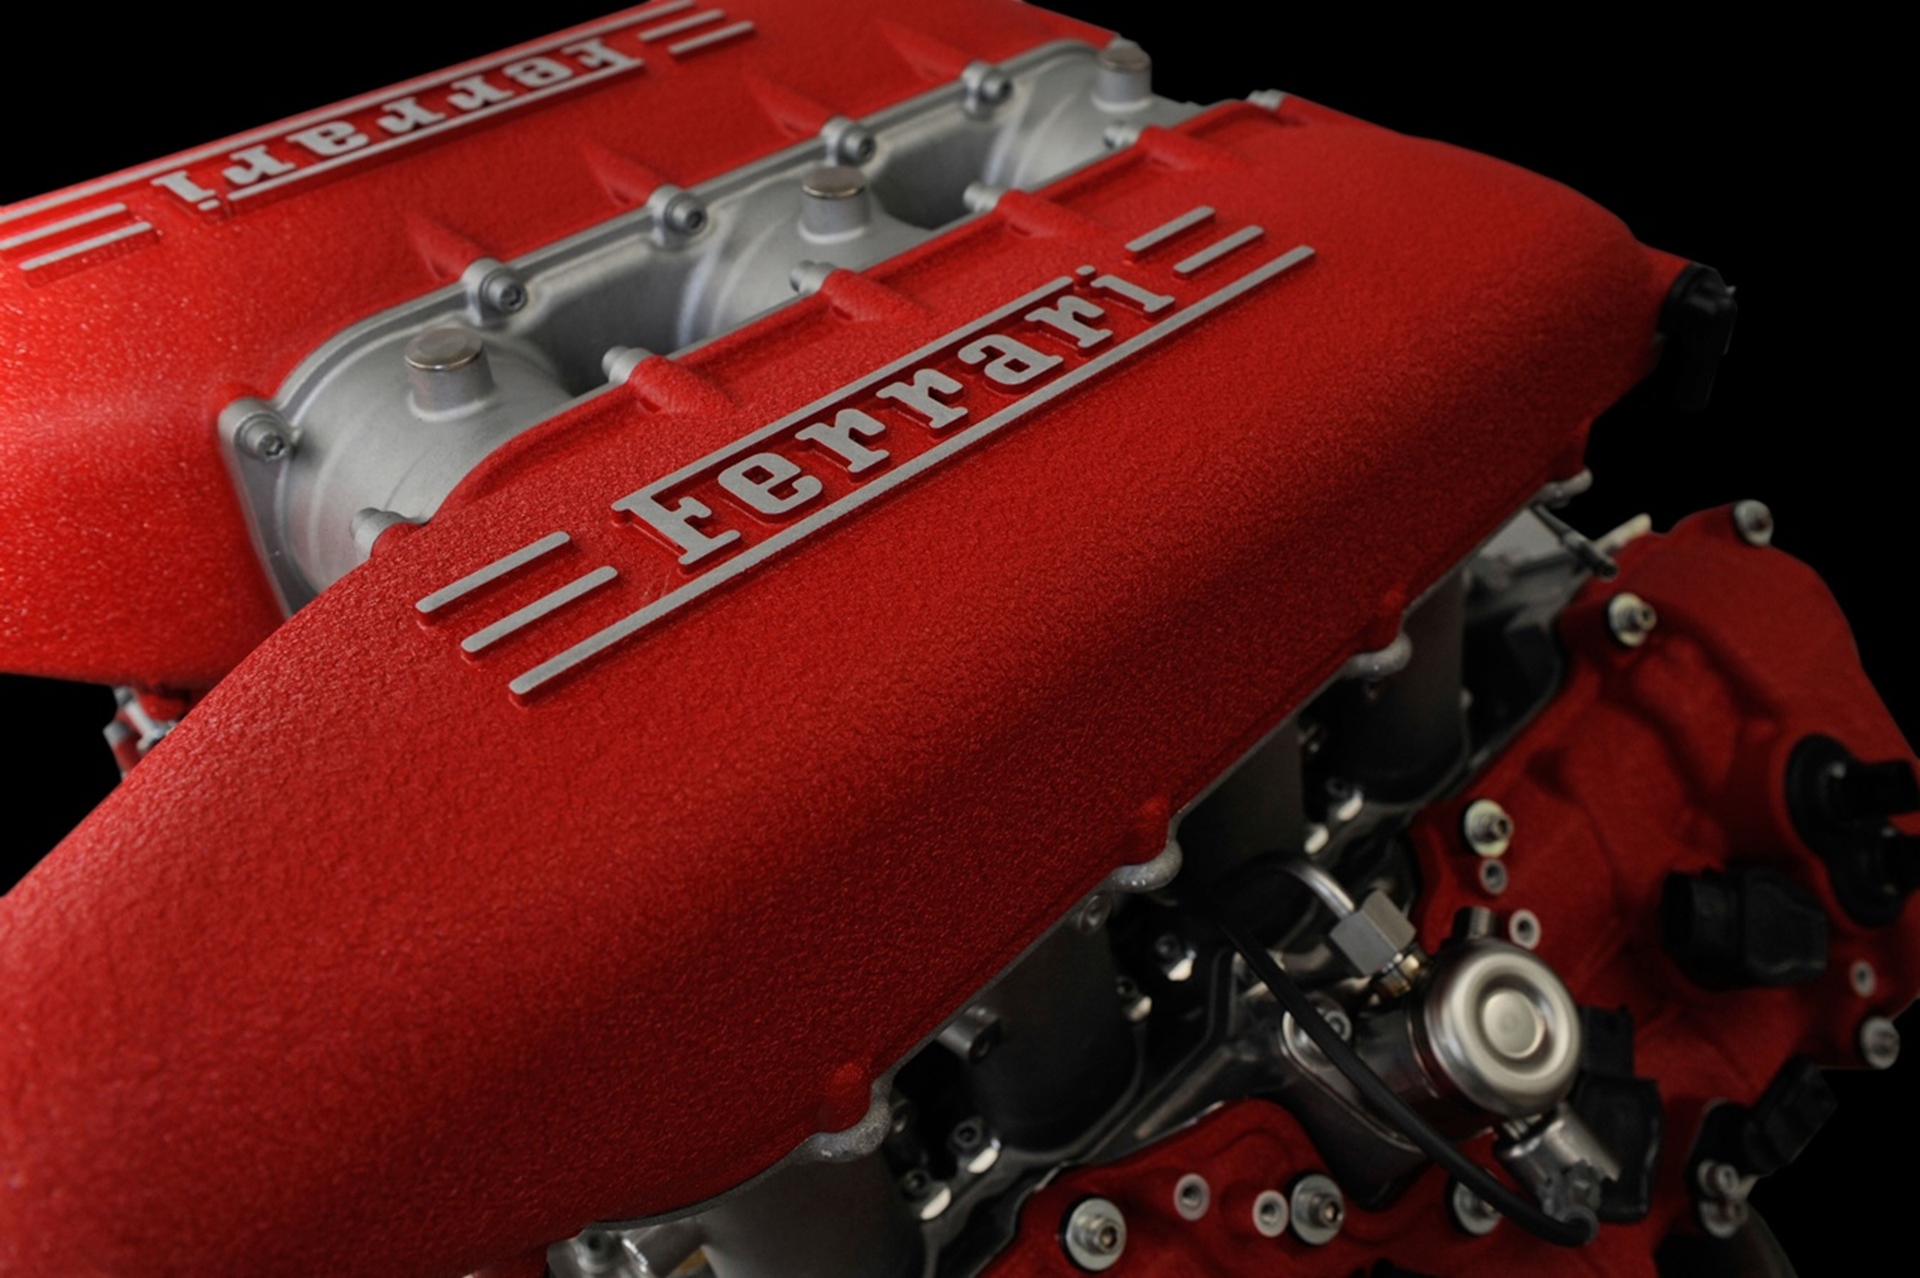 Ferrari V8 takes Best Performance Engine accolade for second year running